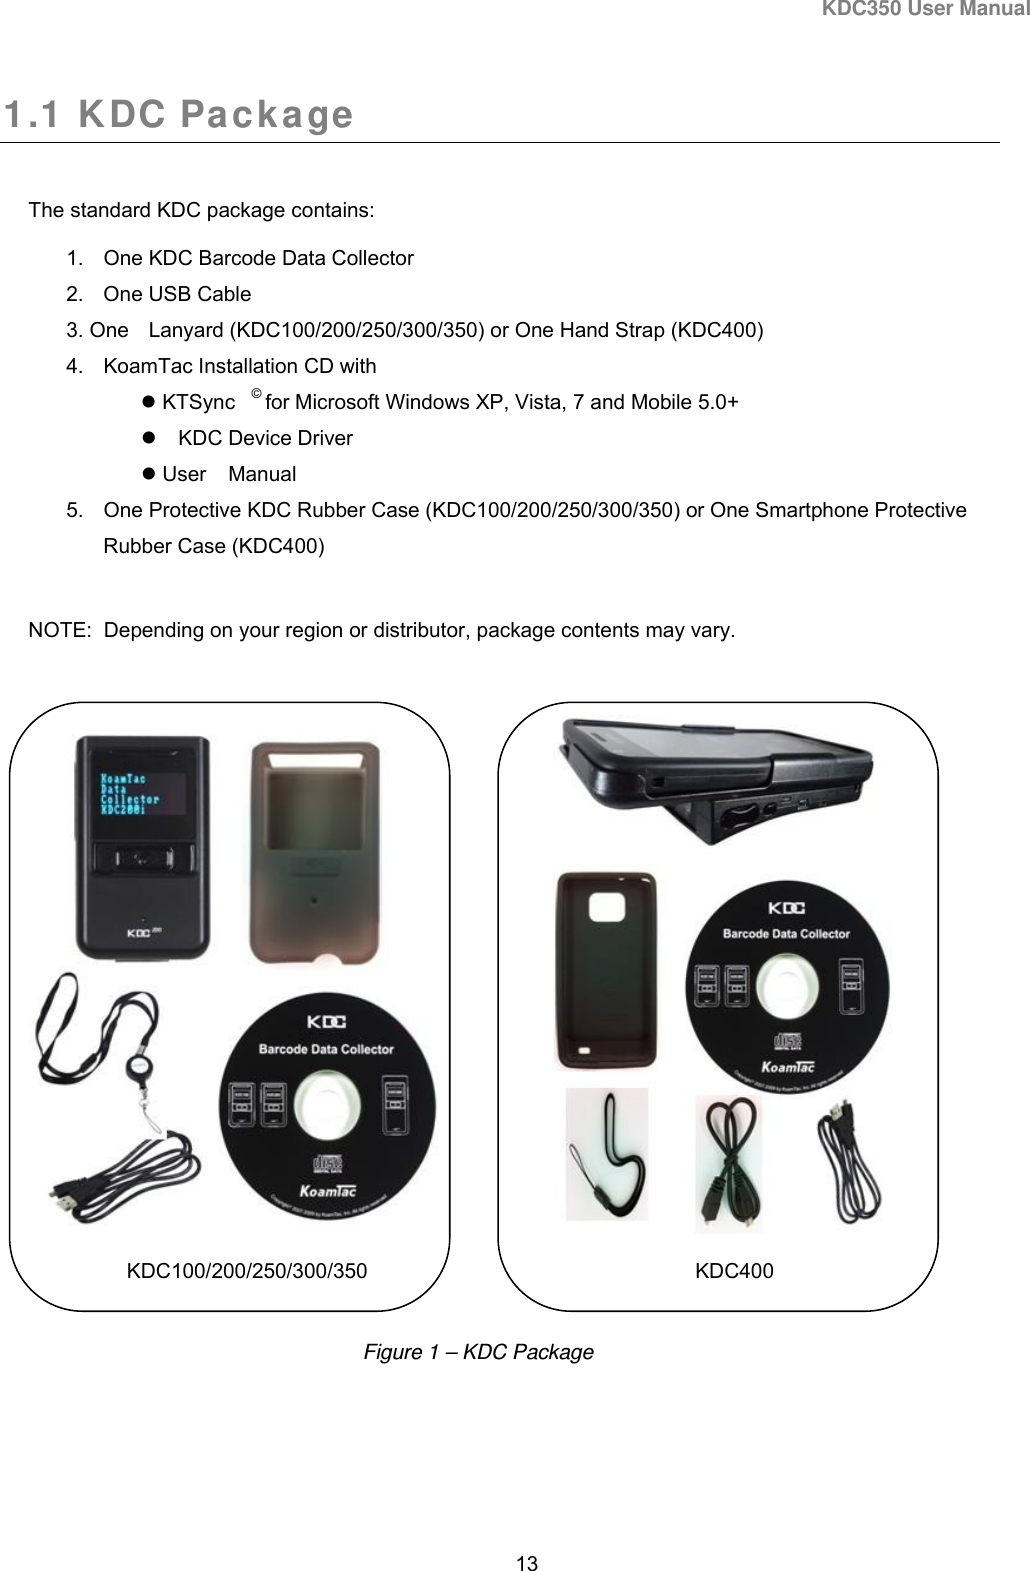 KDC350 User Manual  13  1.1 KDC Package  The standard KDC package contains: 1.  One KDC Barcode Data Collector 2.  One USB Cable 3. One Lanyard (KDC100/200/250/300/350) or One Hand Strap (KDC400) 4.  KoamTac Installation CD with  KTSync © for Microsoft Windows XP, Vista, 7 and Mobile 5.0+   KDC Device Driver    User Manual 5.  One Protective KDC Rubber Case (KDC100/200/250/300/350) or One Smartphone Protective Rubber Case (KDC400)   NOTE:  Depending on your region or distributor, package contents may vary.                                       KDC100/200/250/300/350                KDC400      Figure 1 – KDC Package 